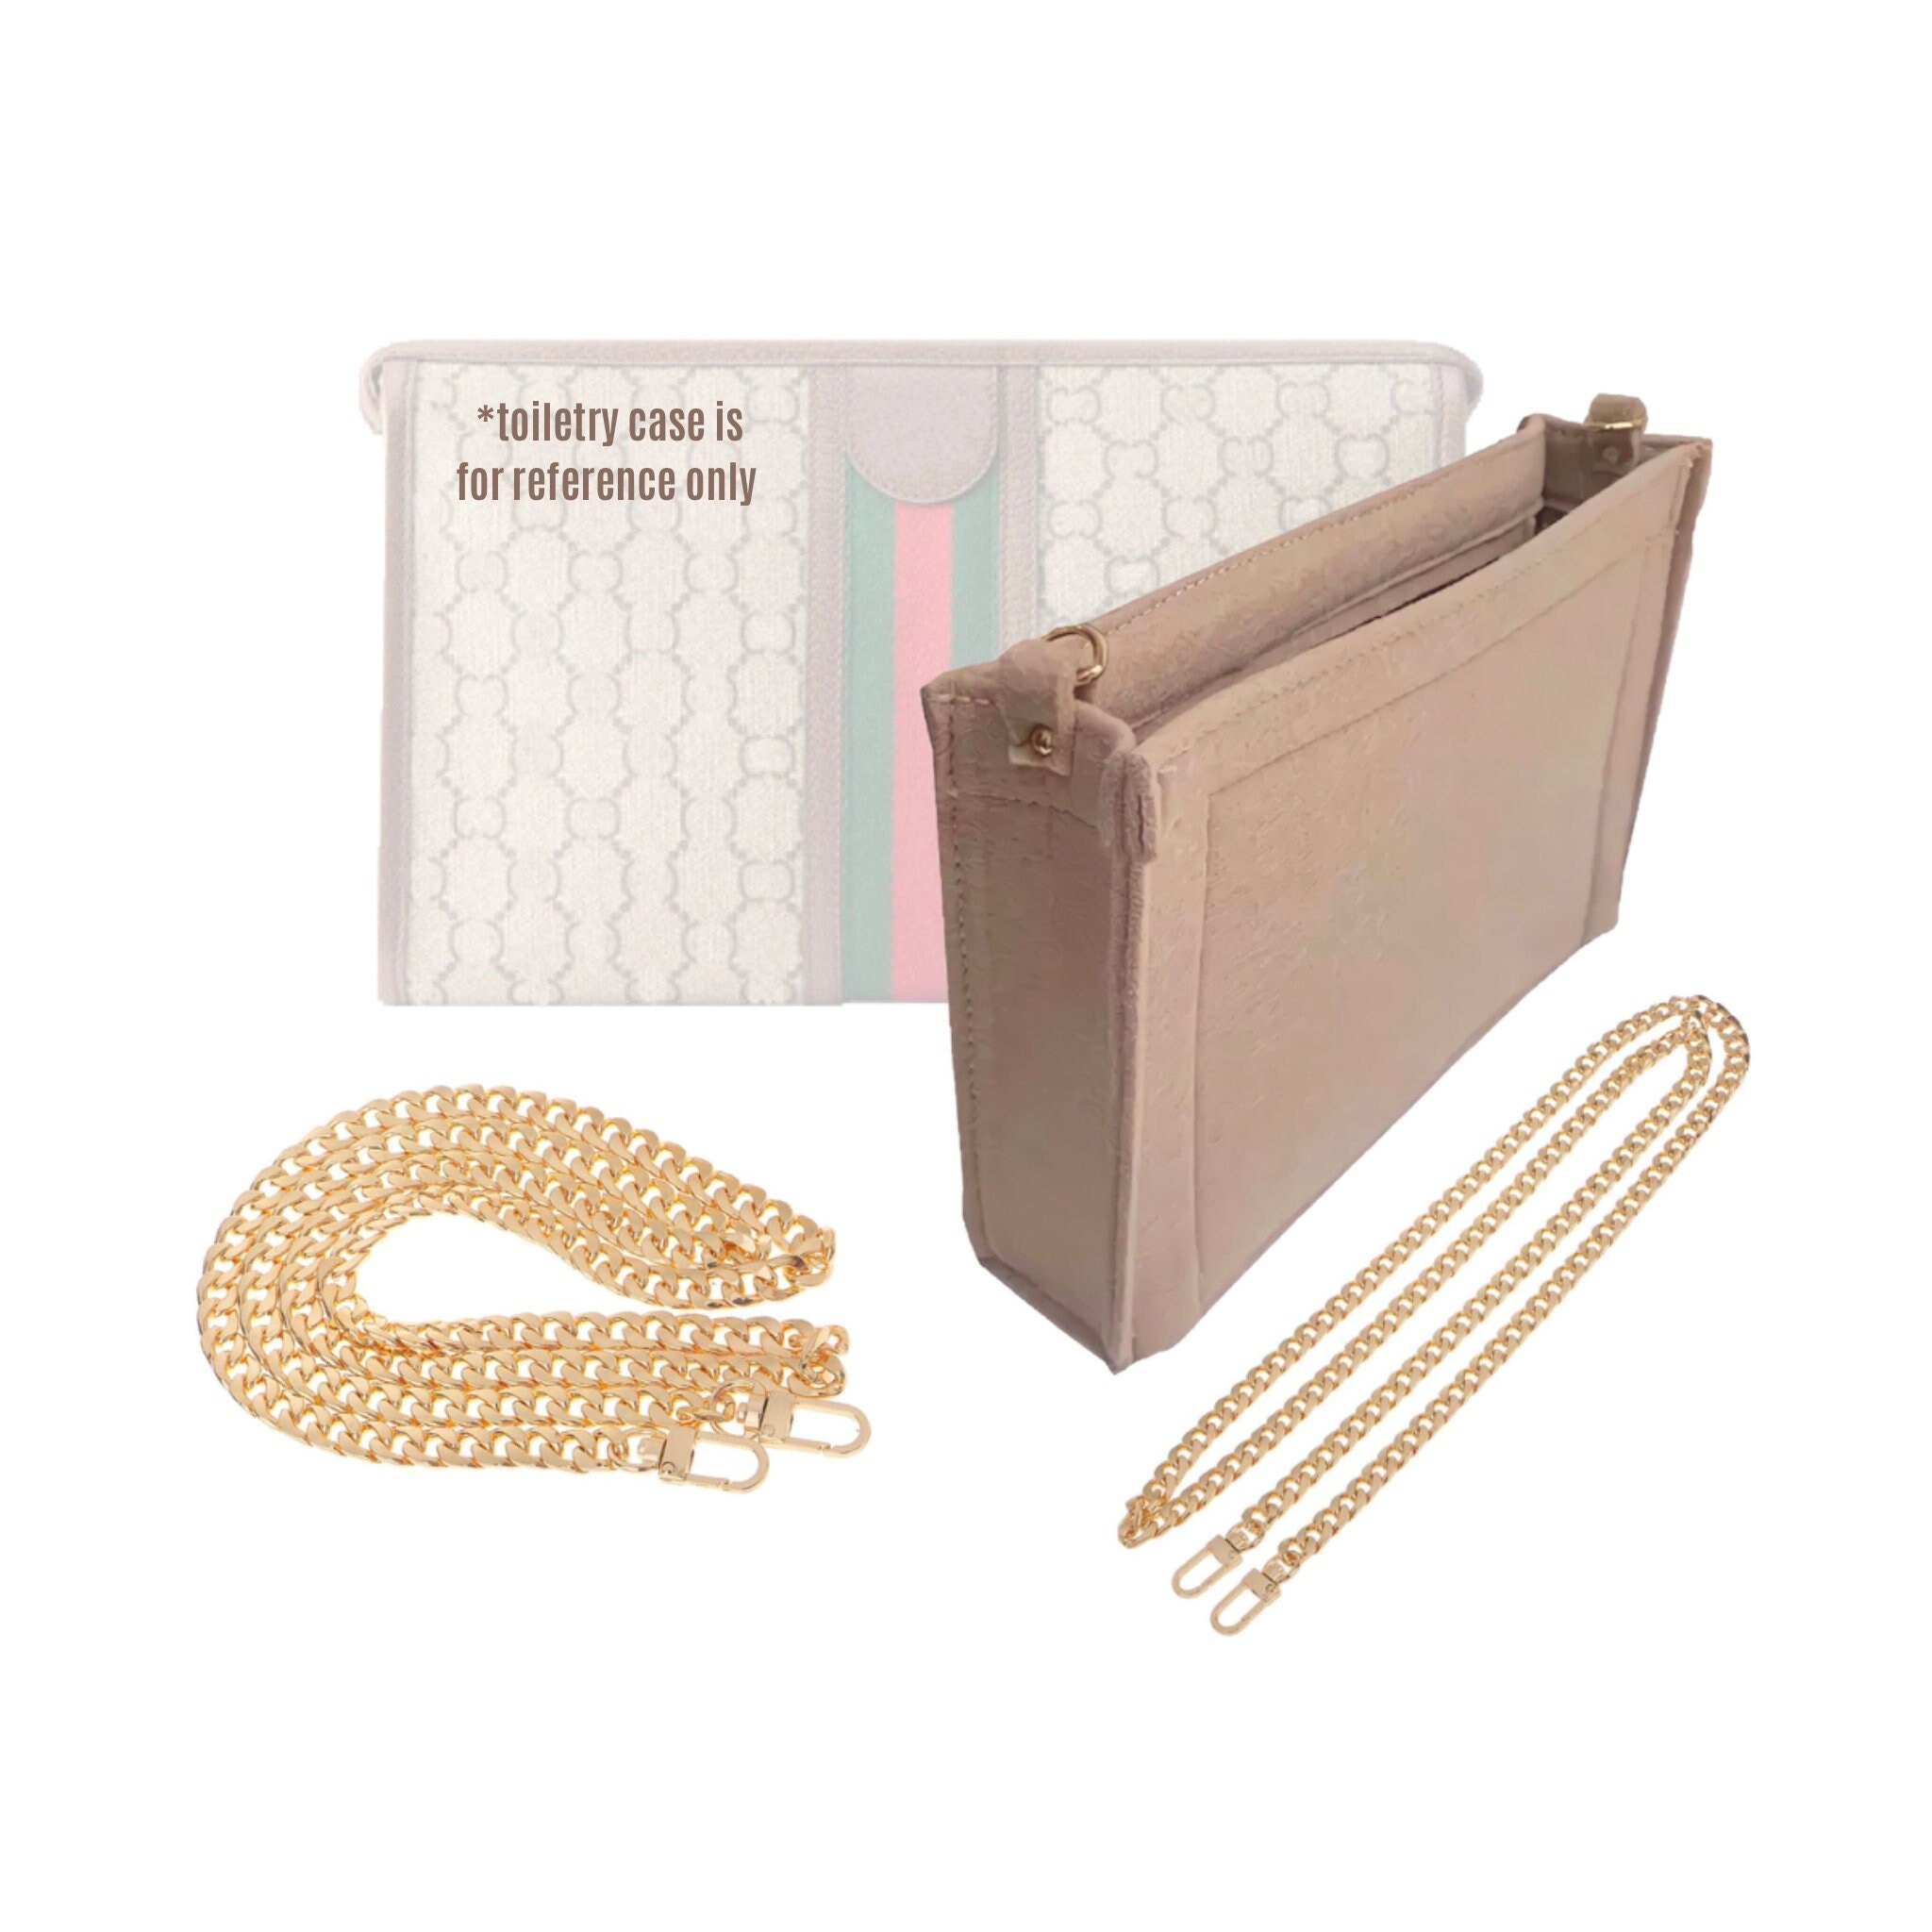 From HER Purse Organizer Insert Conversion Kit with Gold Chain Felt Handbag  LV Toiletry 26, GG Ophidia Pouch